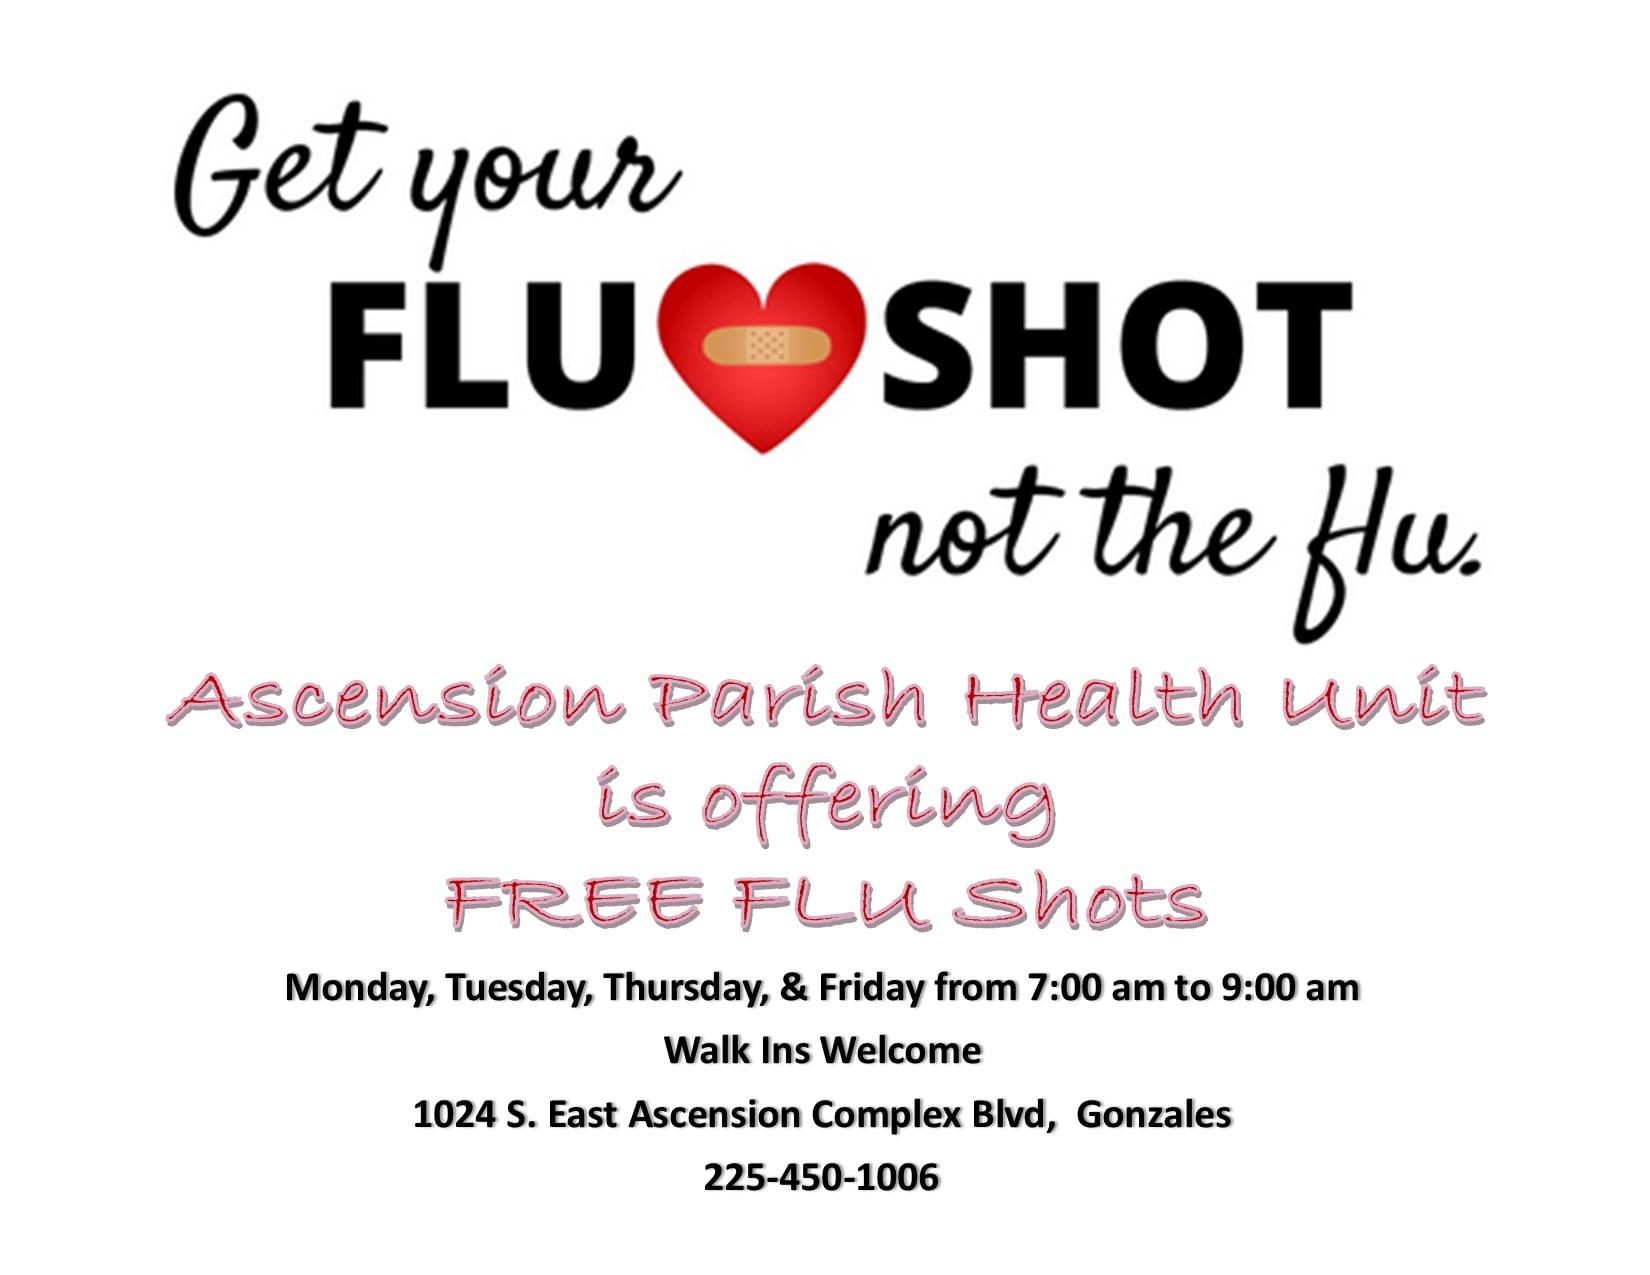 Ascension Parish Health Unit is offering Free Flu Shots on Monday, Tuesday, Thursday, & Friday from 7:00 am to 9:00 am. Walk Ins are Welcome. Located at 1024 S. East Ascension Complex Blvd, Gonzales. Contact them at 225-450-1006